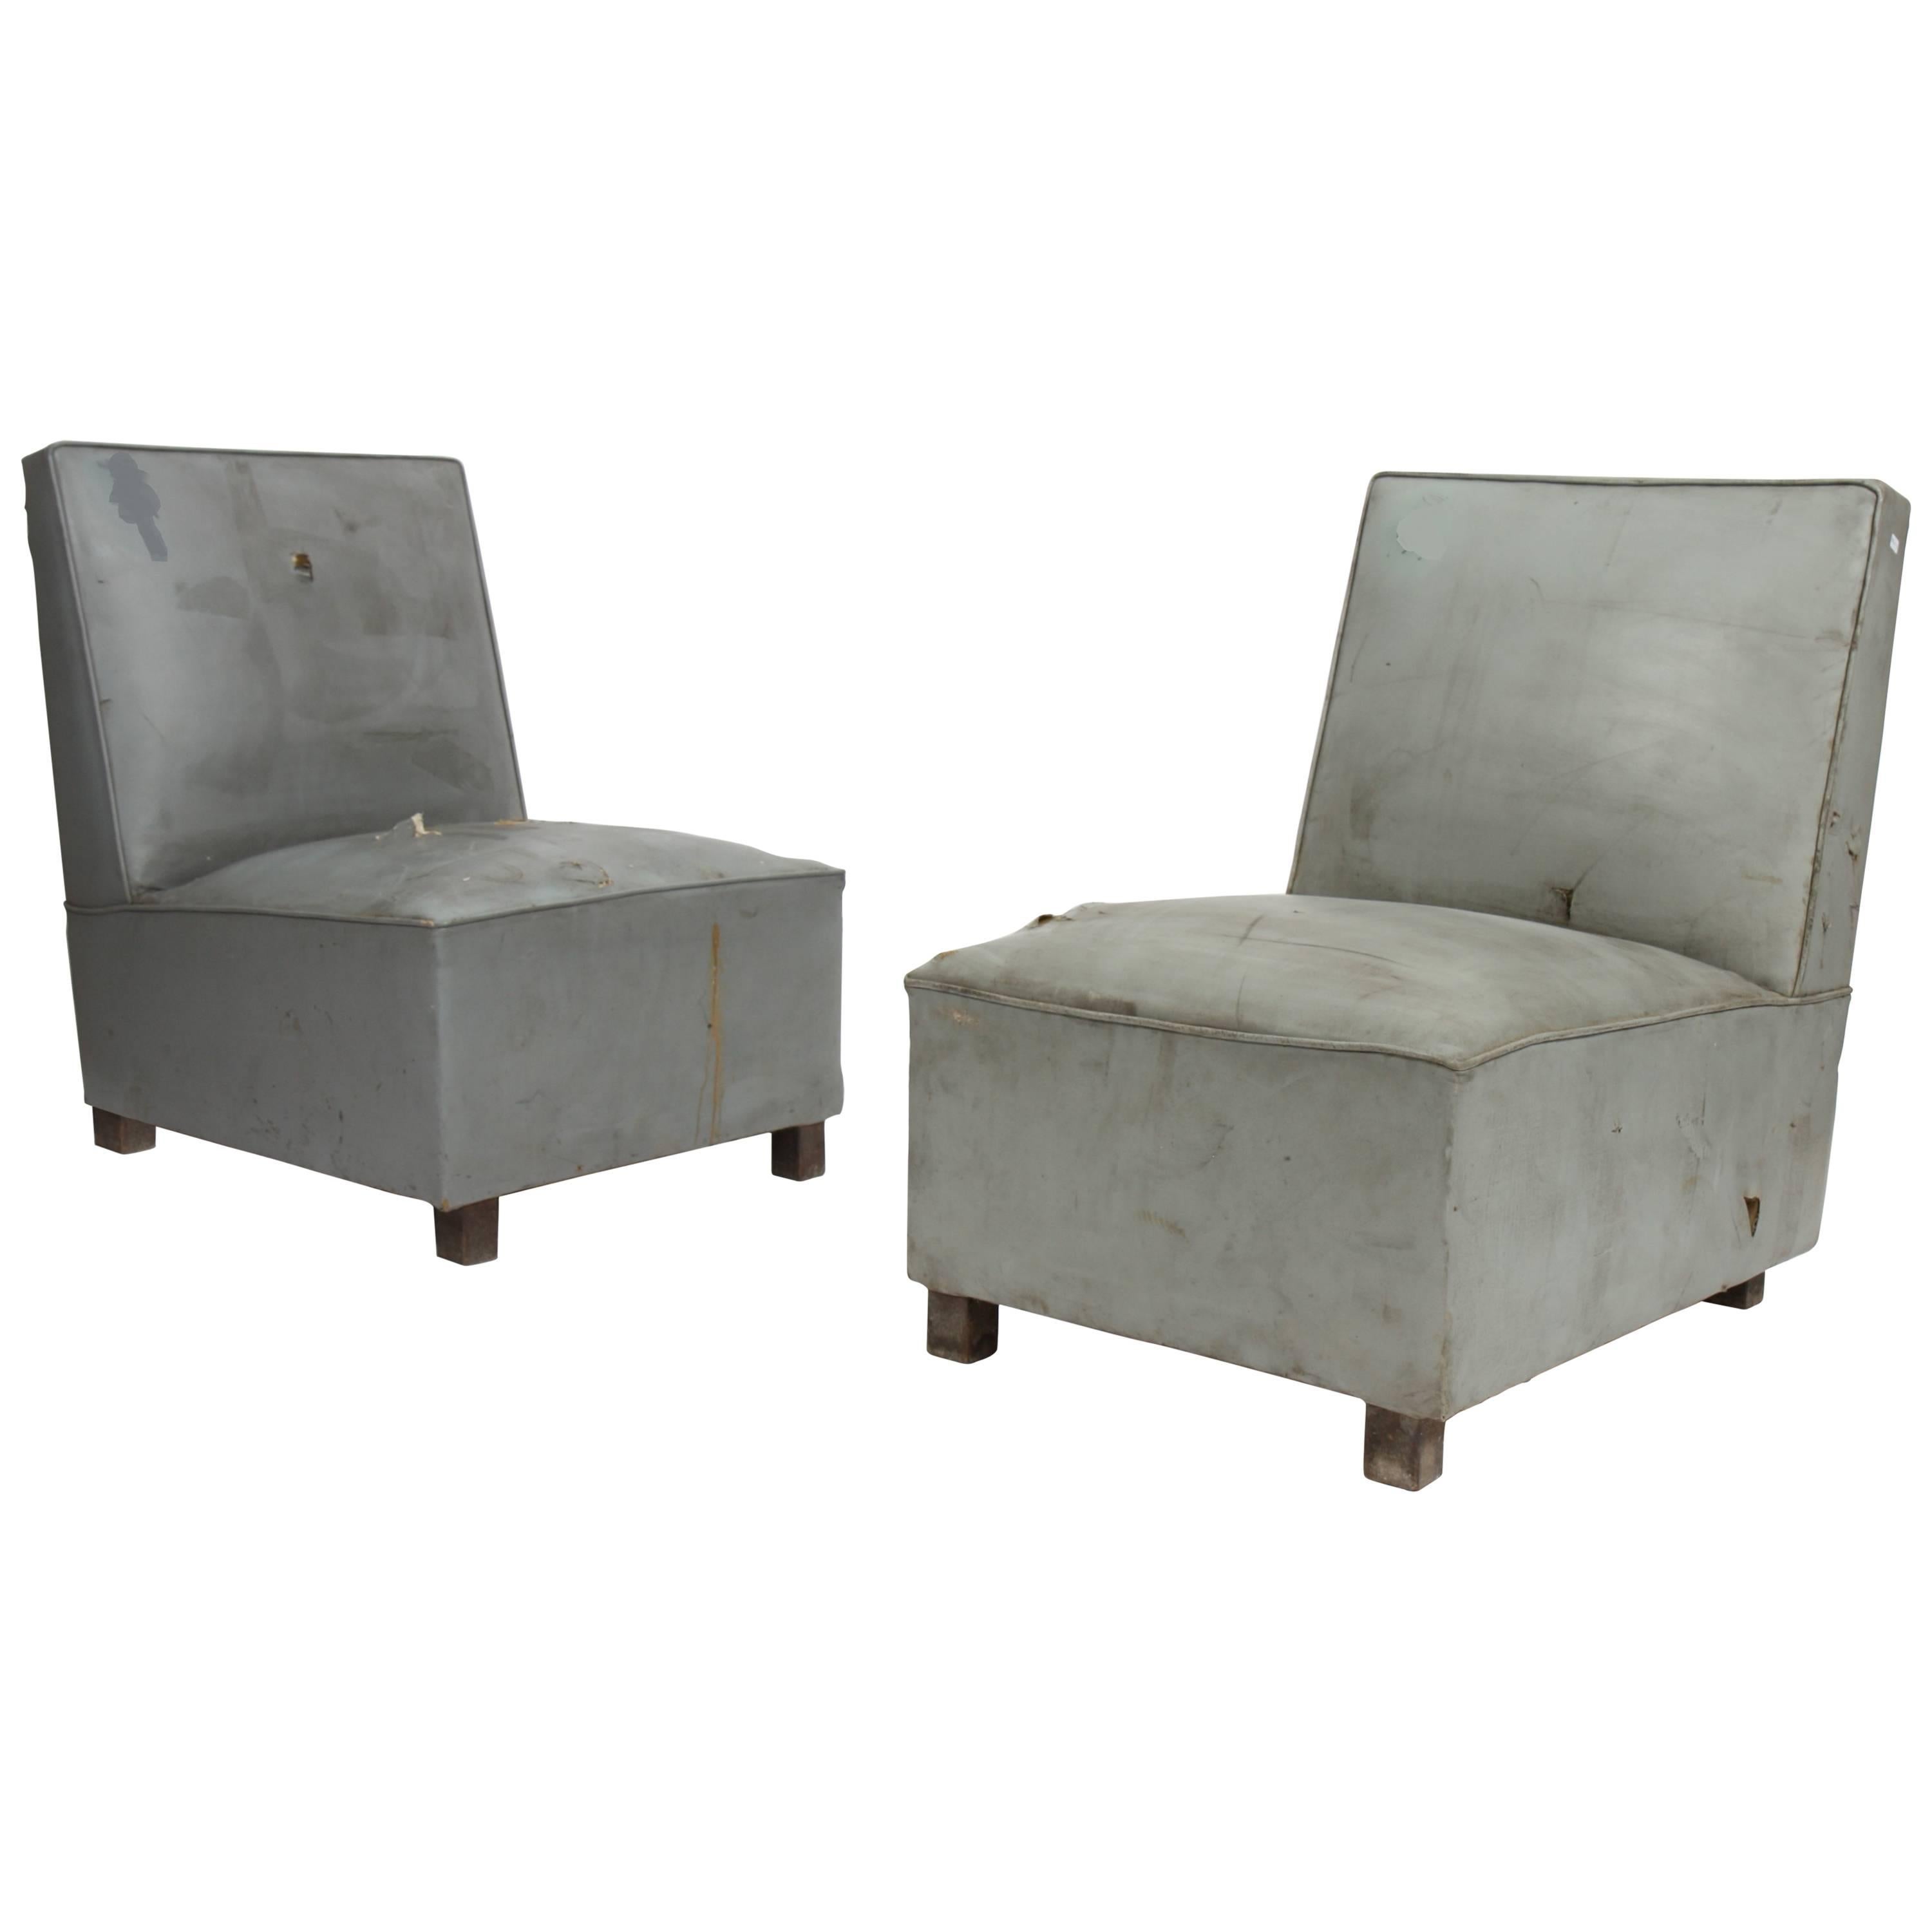 Pierre Jeanneret Exceptional Set of Two Lounge Seats